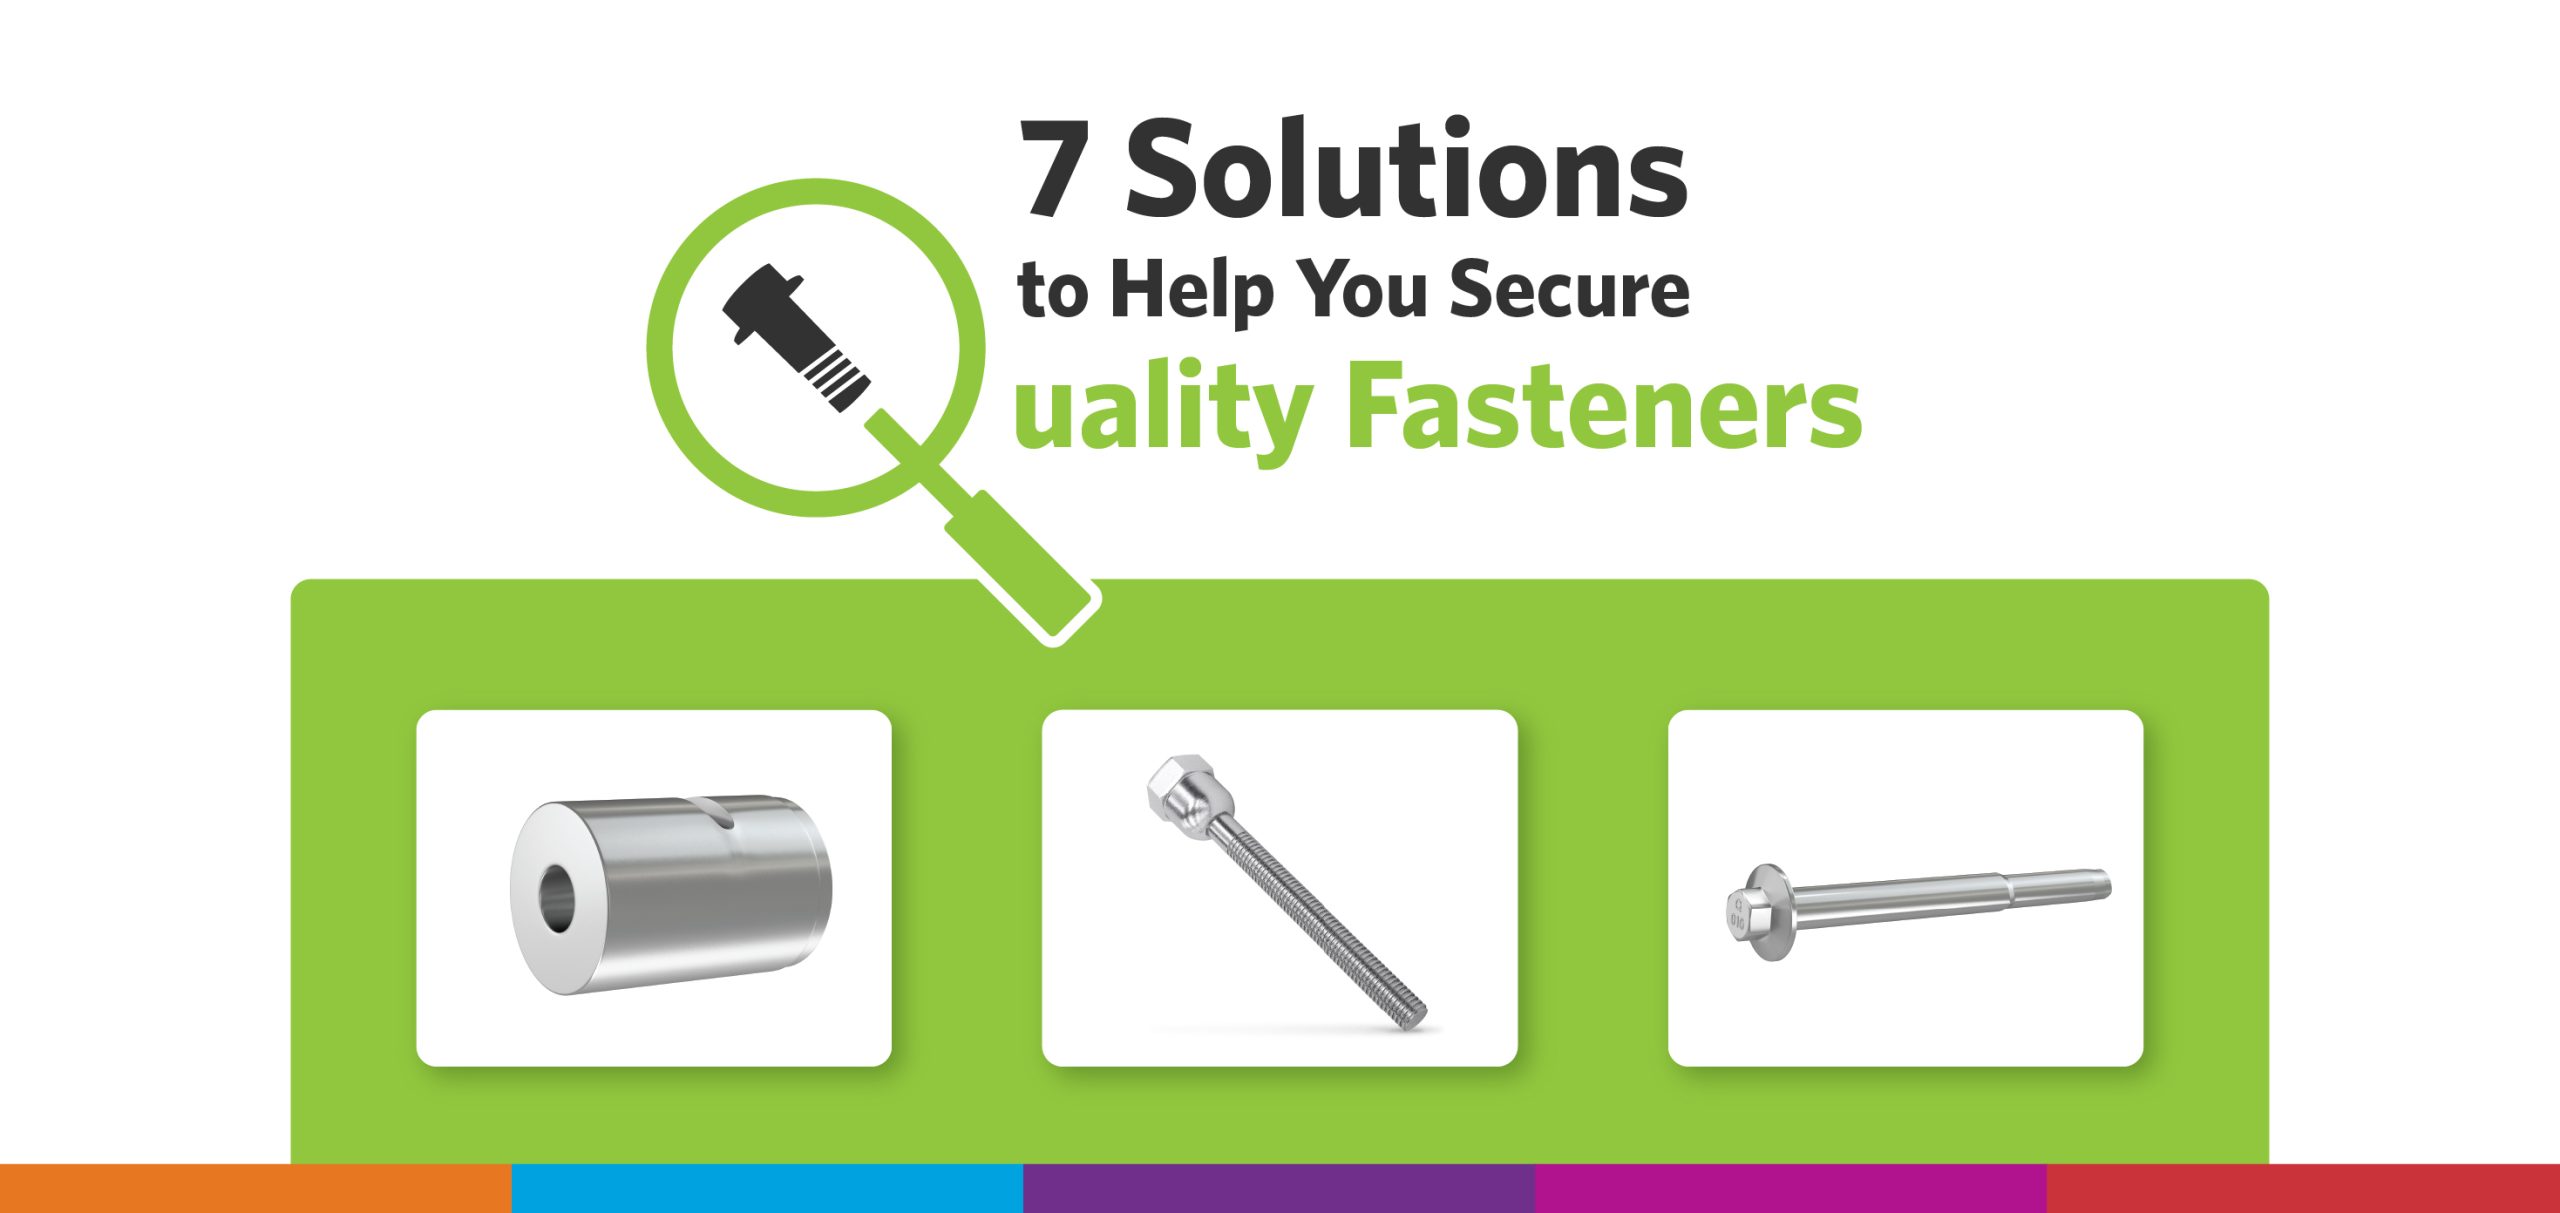 Quality Fasteners: 7 Solutions to Help You Secure the Right Part